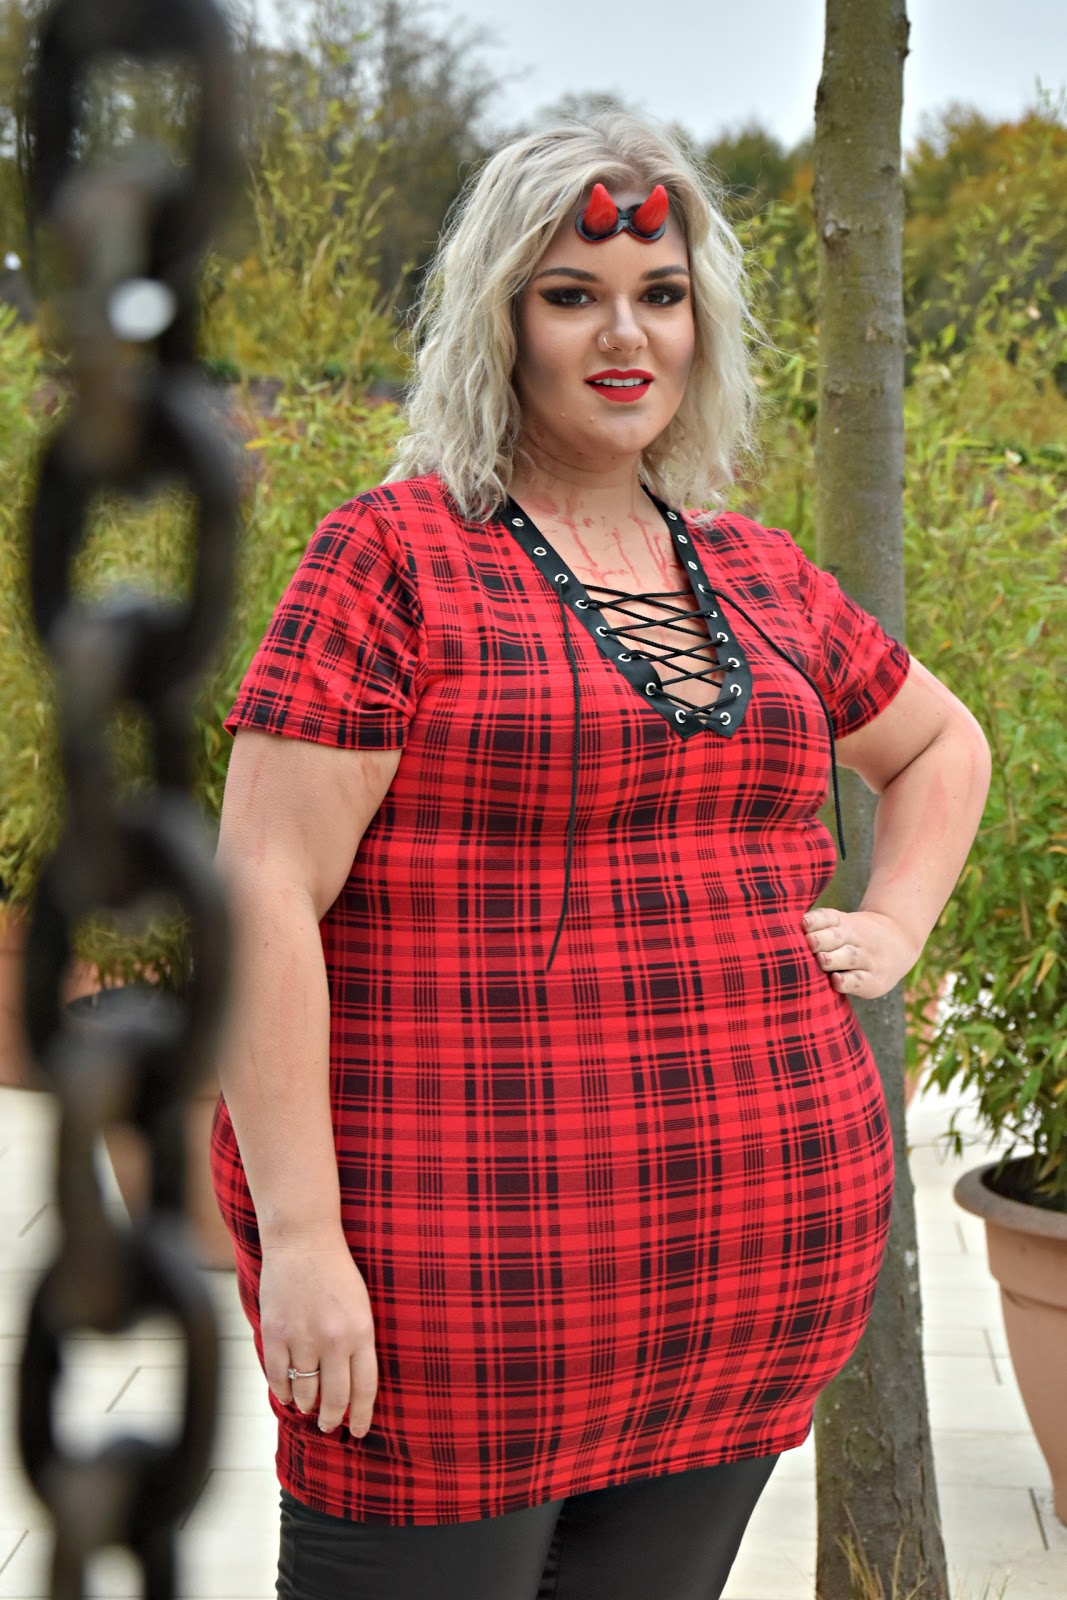 Plus Size Devil Outfit from Yours Clothing - WhatLauraLoves